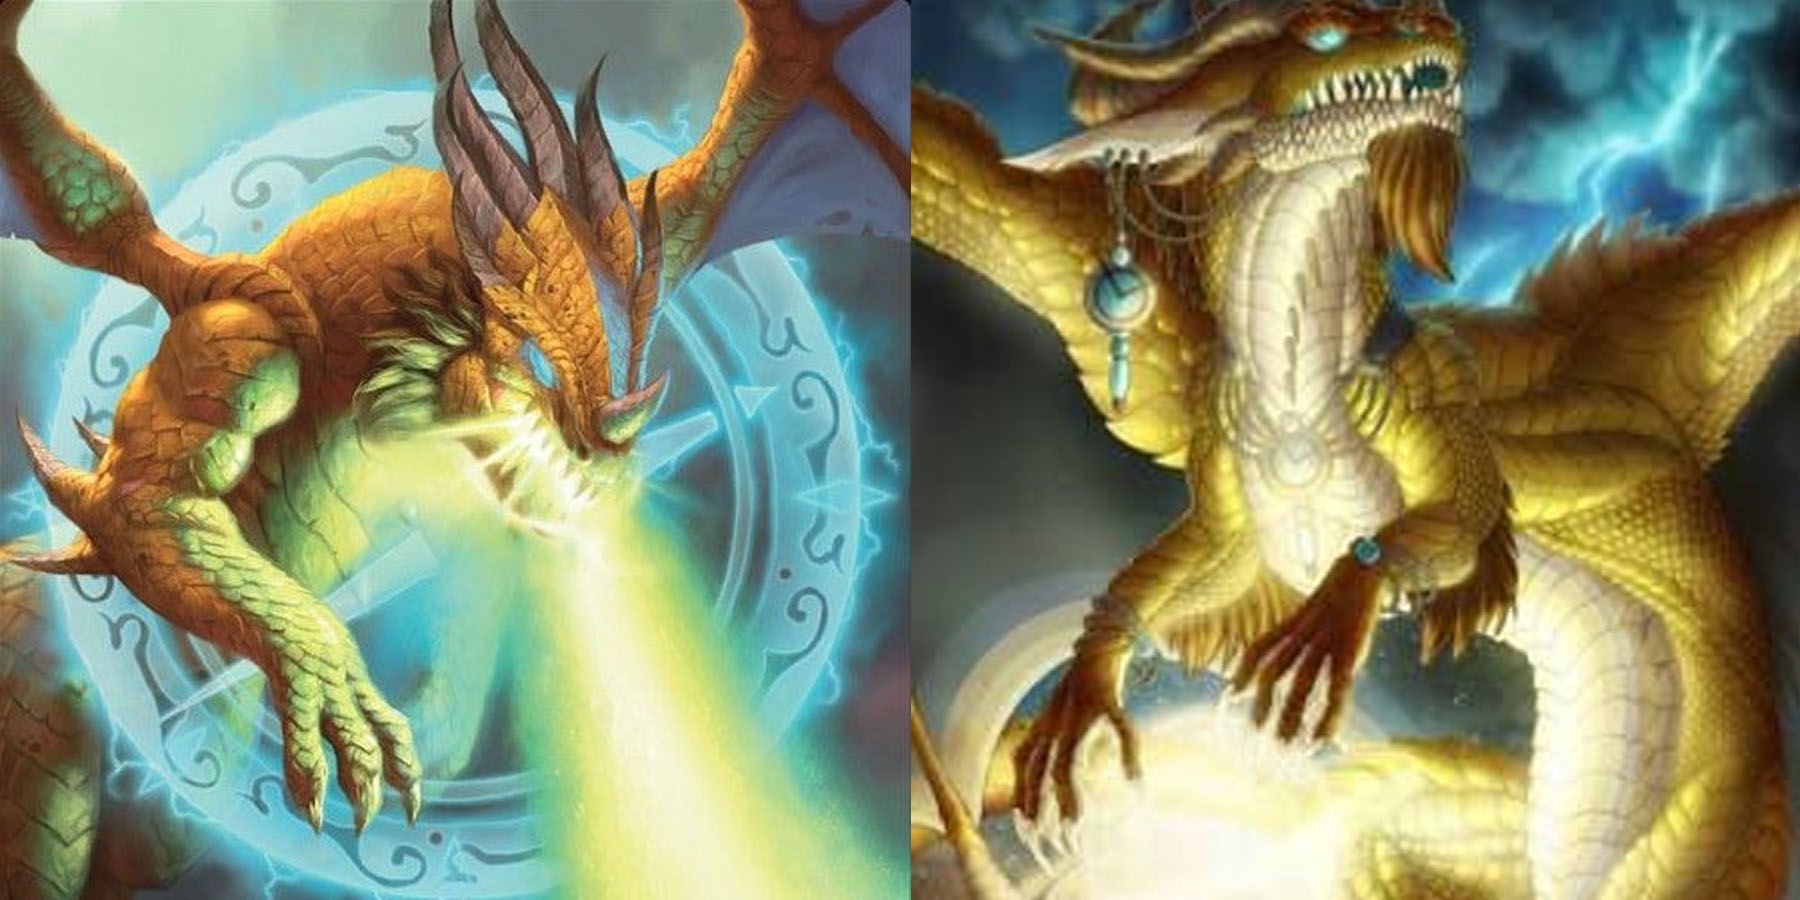 The Bronze Dragonflight guards timelines